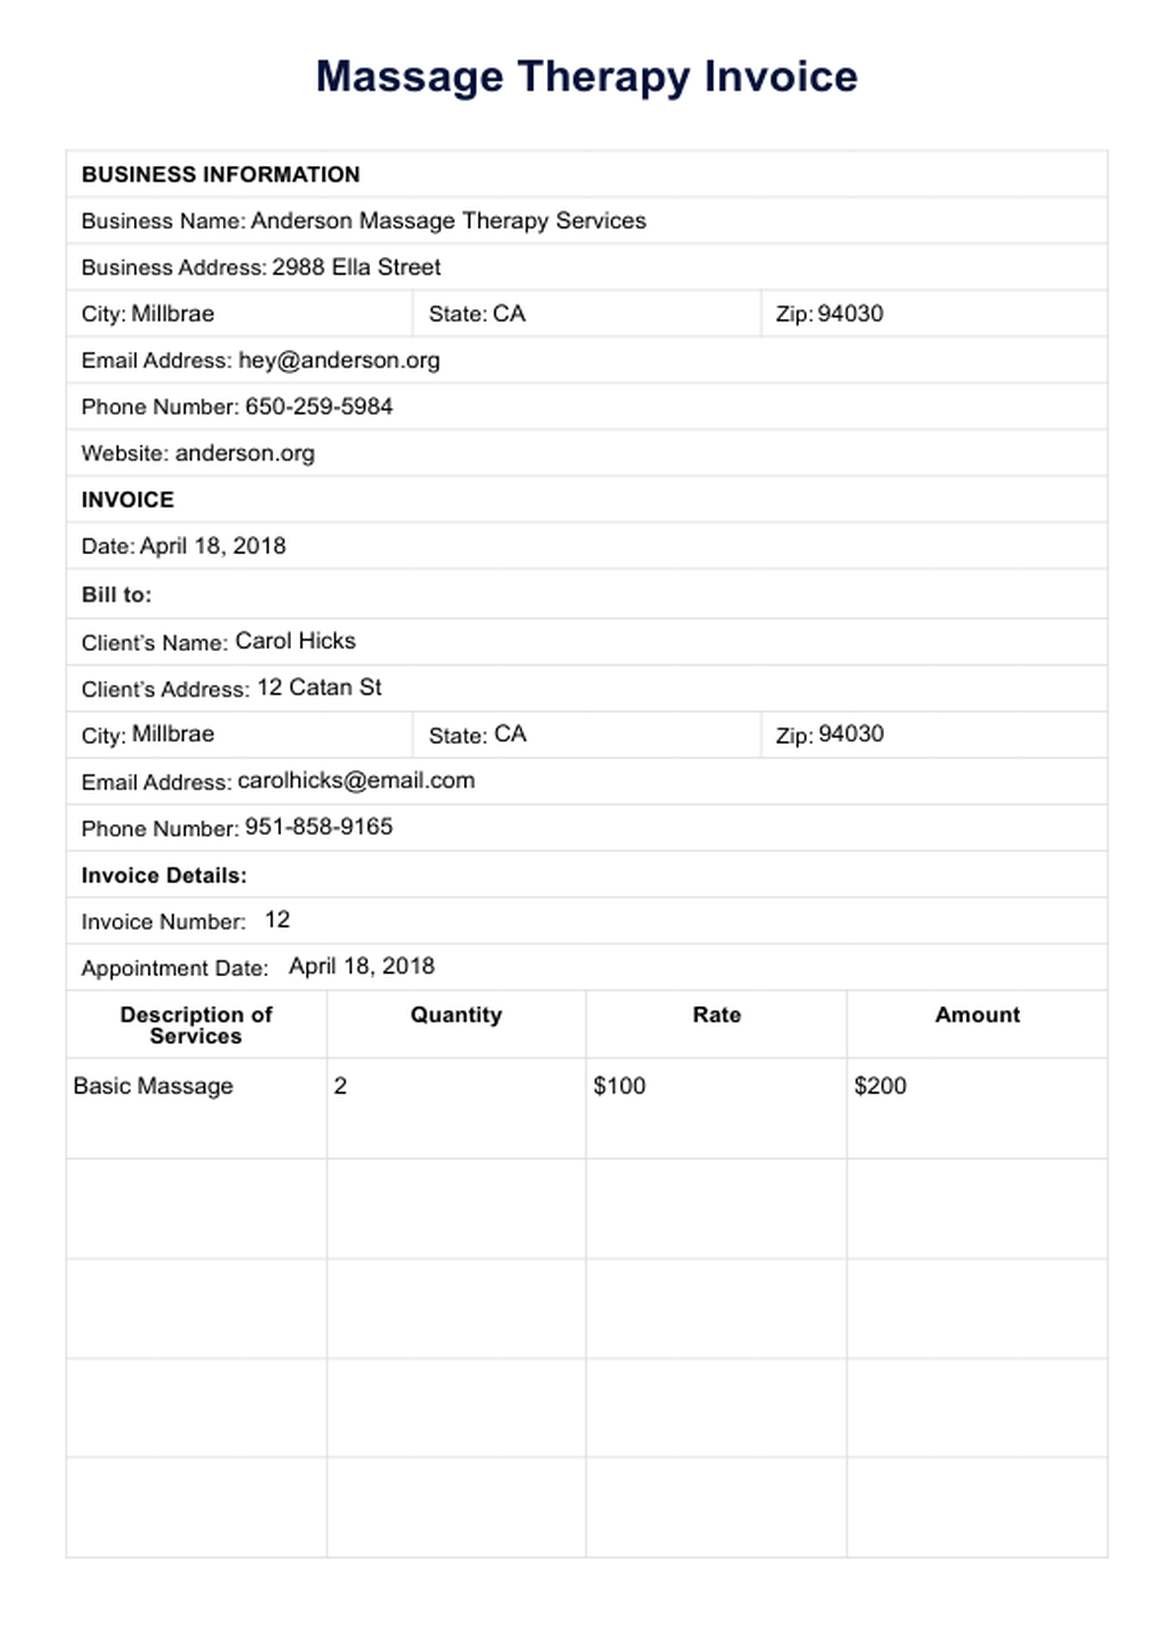 Massage Therapy Invoice Template PDF Example